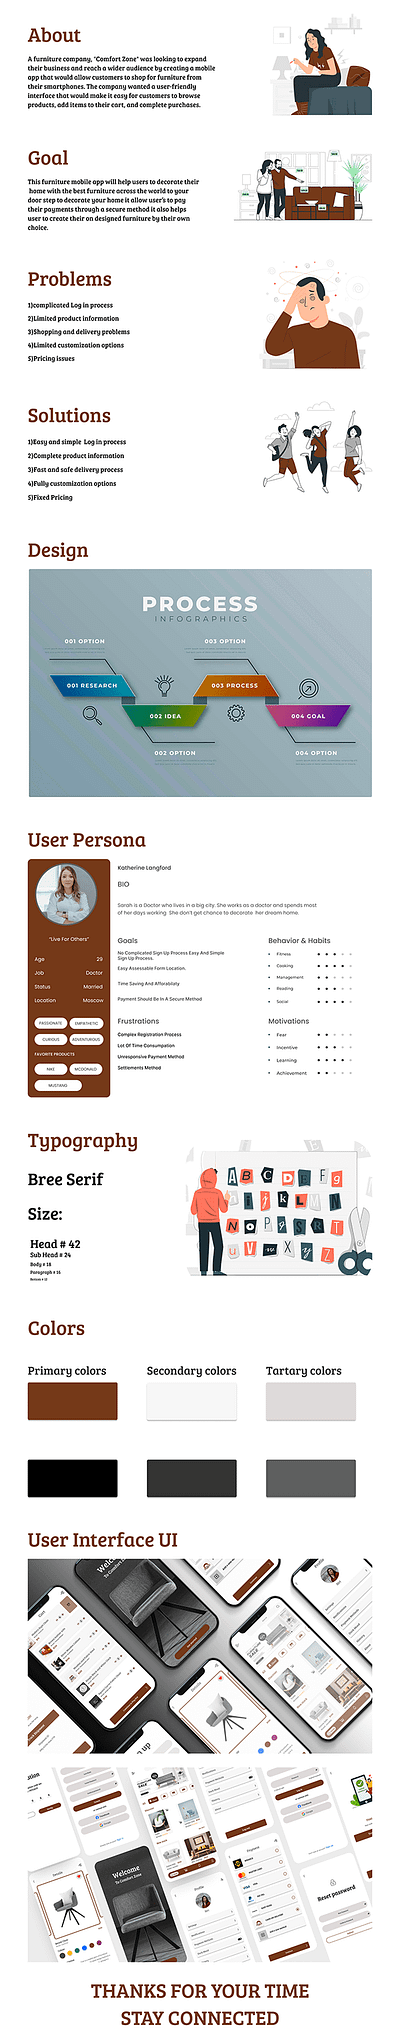 User Experience (UX) & User Interface Design With User Persona adobe illustrator adobe photoshop adobe xd design figma graphic design ux ui design